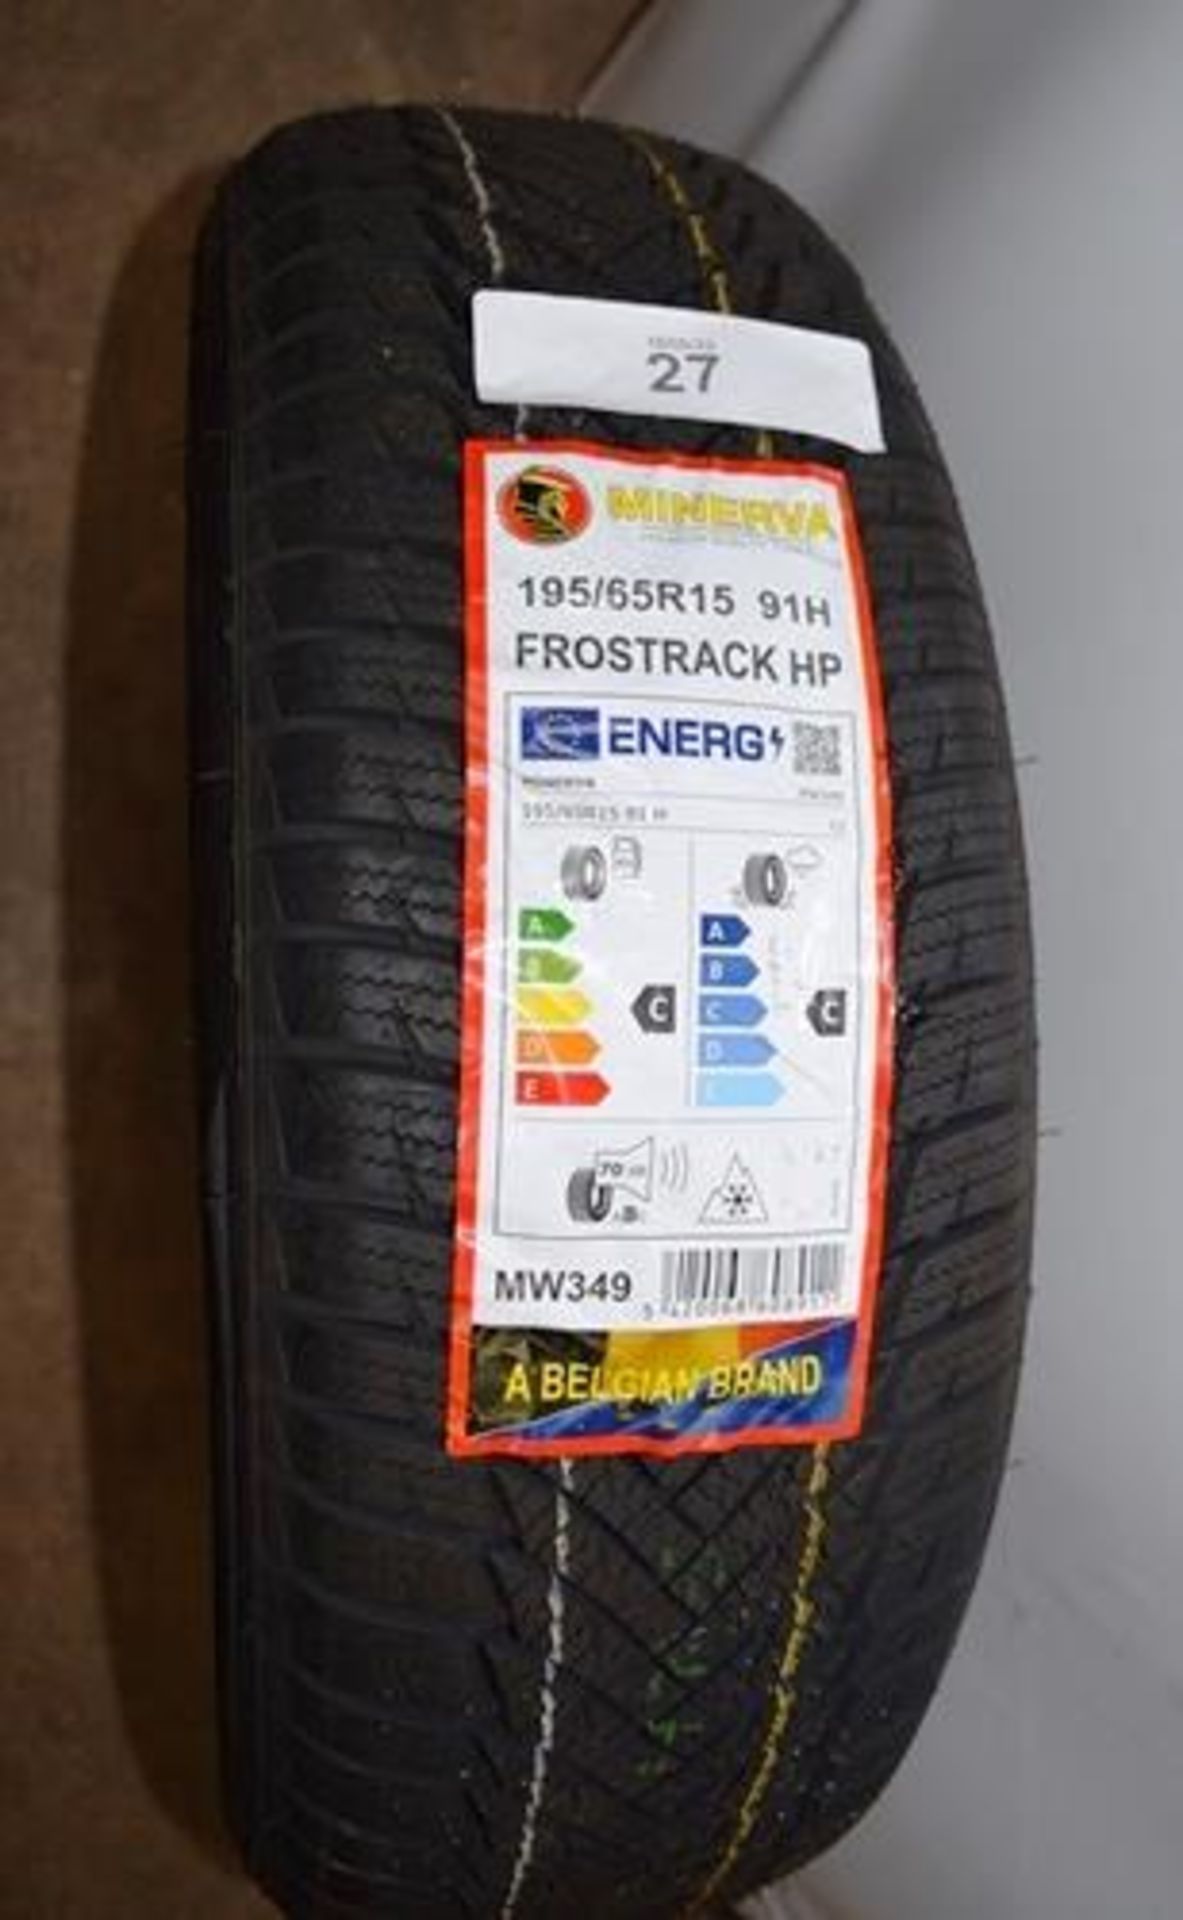 1 x Minerva Frost Rack HP tyre, size 195/65R15 91H - New with label (GS2) - Image 2 of 2